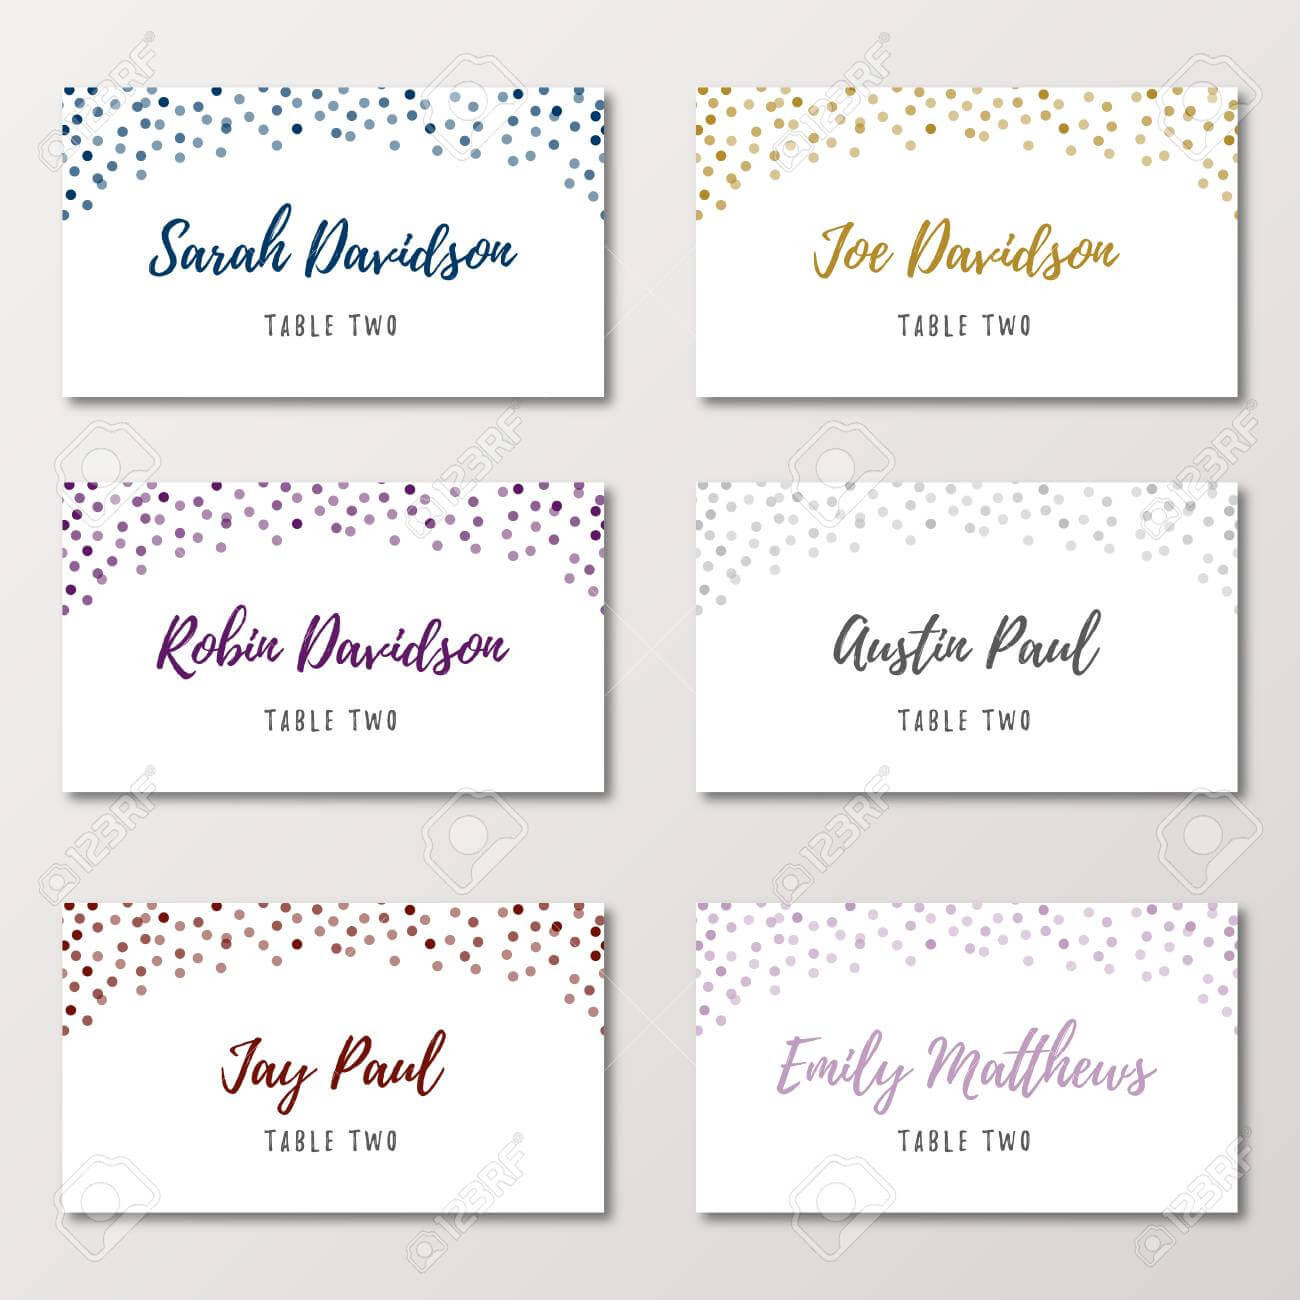 Table Cards Template Calep midnightpig co In Table Name Card Template Professional Template